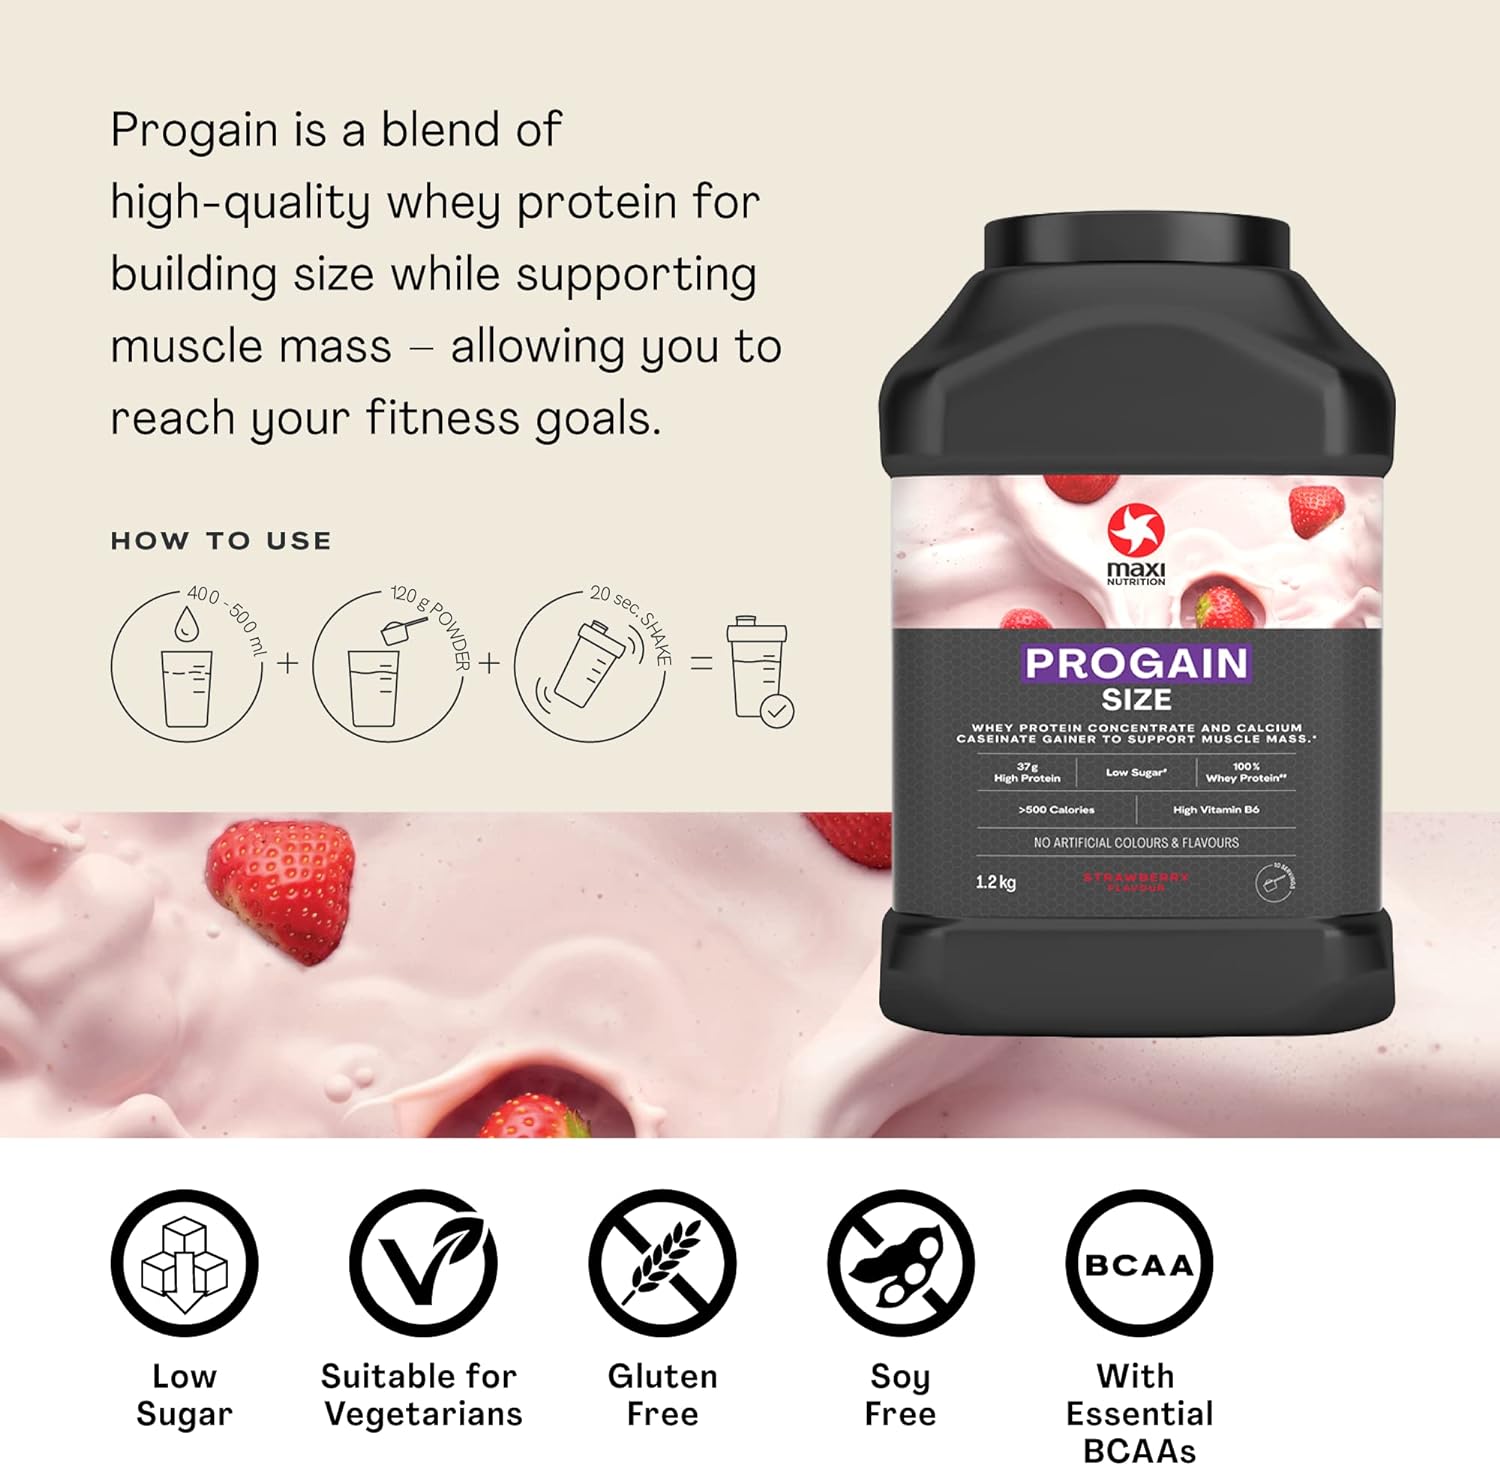 MaxiNutrition - Progain, Strawberry - Whey Protein Powder for Size & Muscle Mass – Low Sugar, Vegetarian-Friendly, 37g Protein, 511 kcal per Serving, 1.2kg